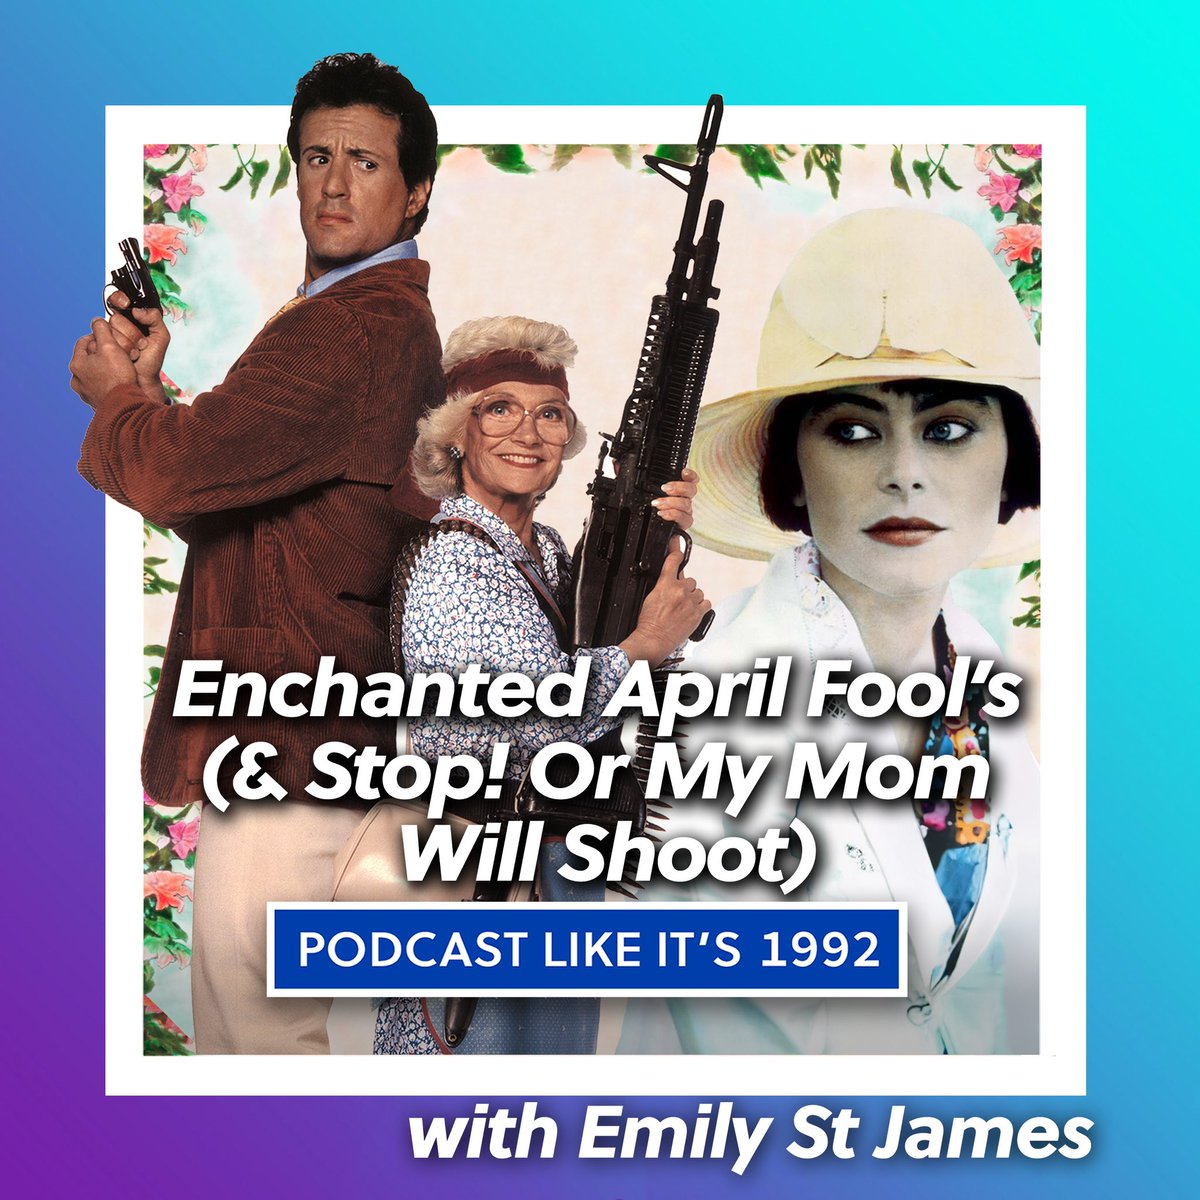 It’s Enchanted April (Fools) on @podcastlikeits 1992 this week as @emilystjams and I obviously discuss Enchanted April and Stop! Or My Mom Will Shoot. We talk Golden Girls, Miramax period pieces and Stallone in a diaper. It’s a lot. You’re not going to want to miss it.